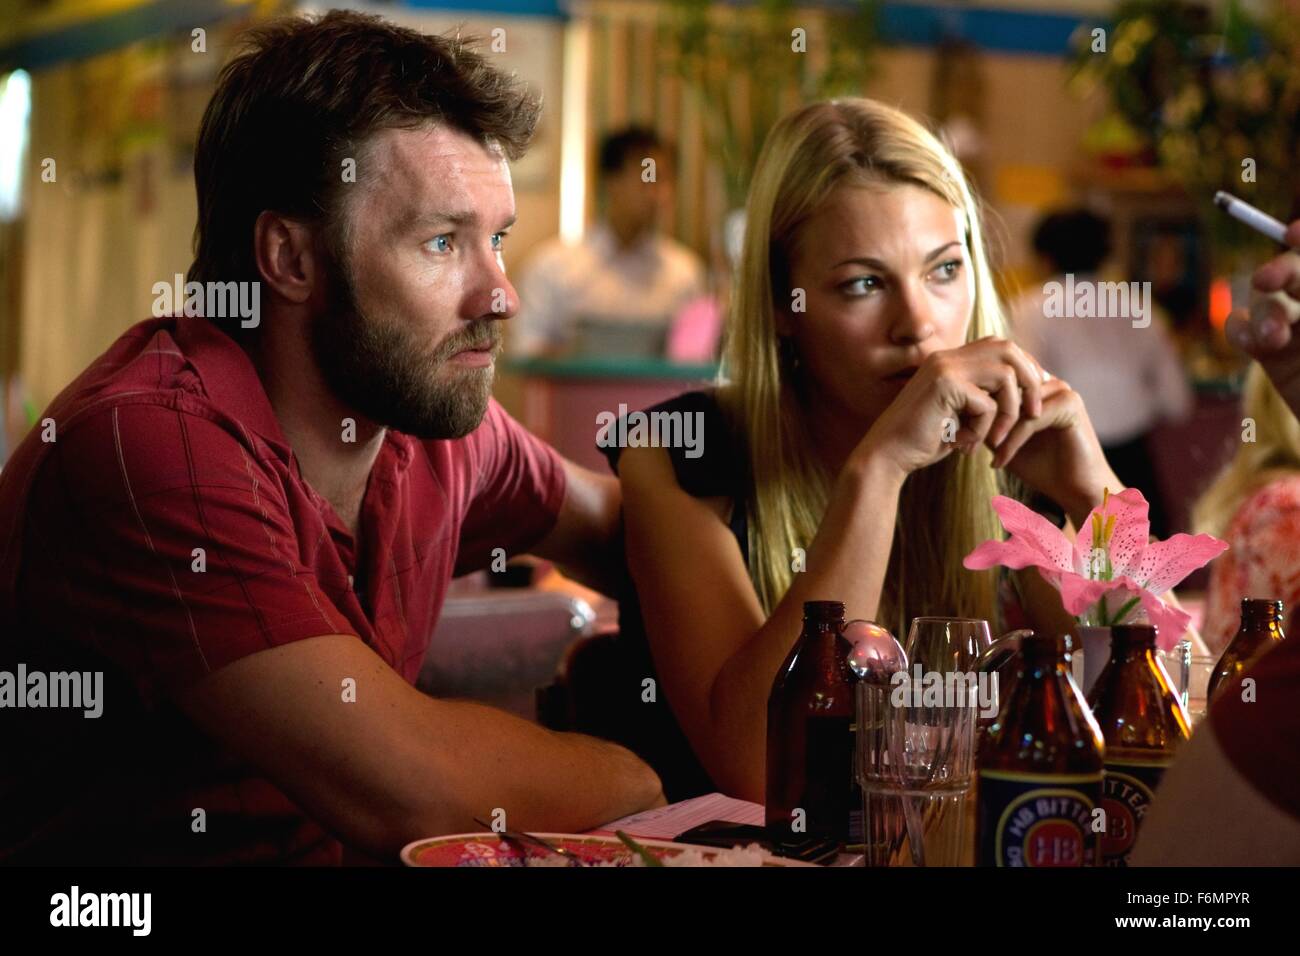 RELEASE DATE: 13 August 2010. MOVIE TITLE: Animal Kingdom. STUDIO: Porchlight Films. PLOT: Tells the story of seventeen year-old J (Josh) as he navigates his survival amongst an explosive criminal family and the detective who thinks he can save him. PICTURED: JOEL EDGERTON as Barry Brown and MIRRAH FOULKES as Catherine Brown. Stock Photo